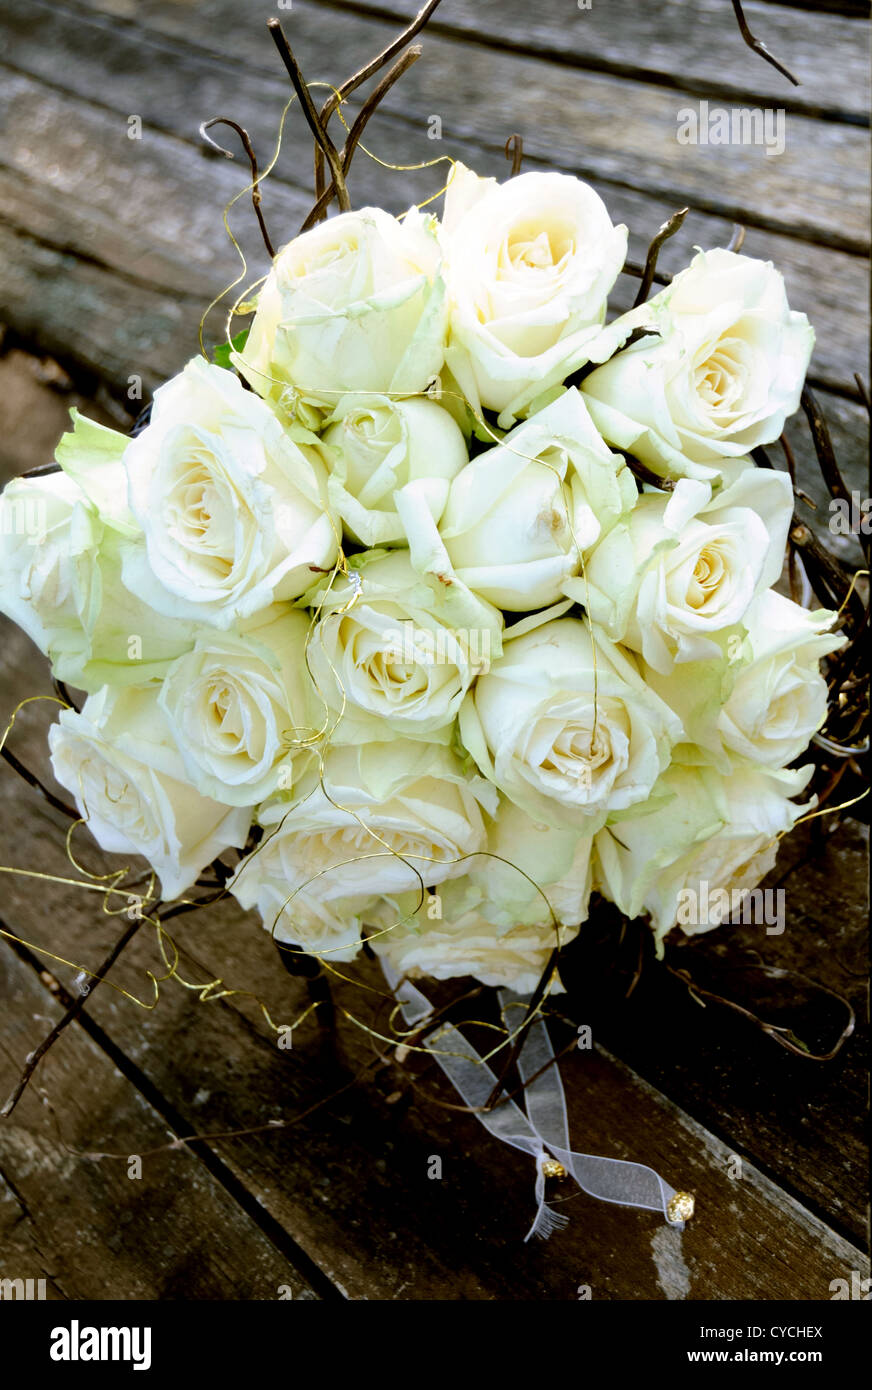 Bouquet of white roses Stock Photo